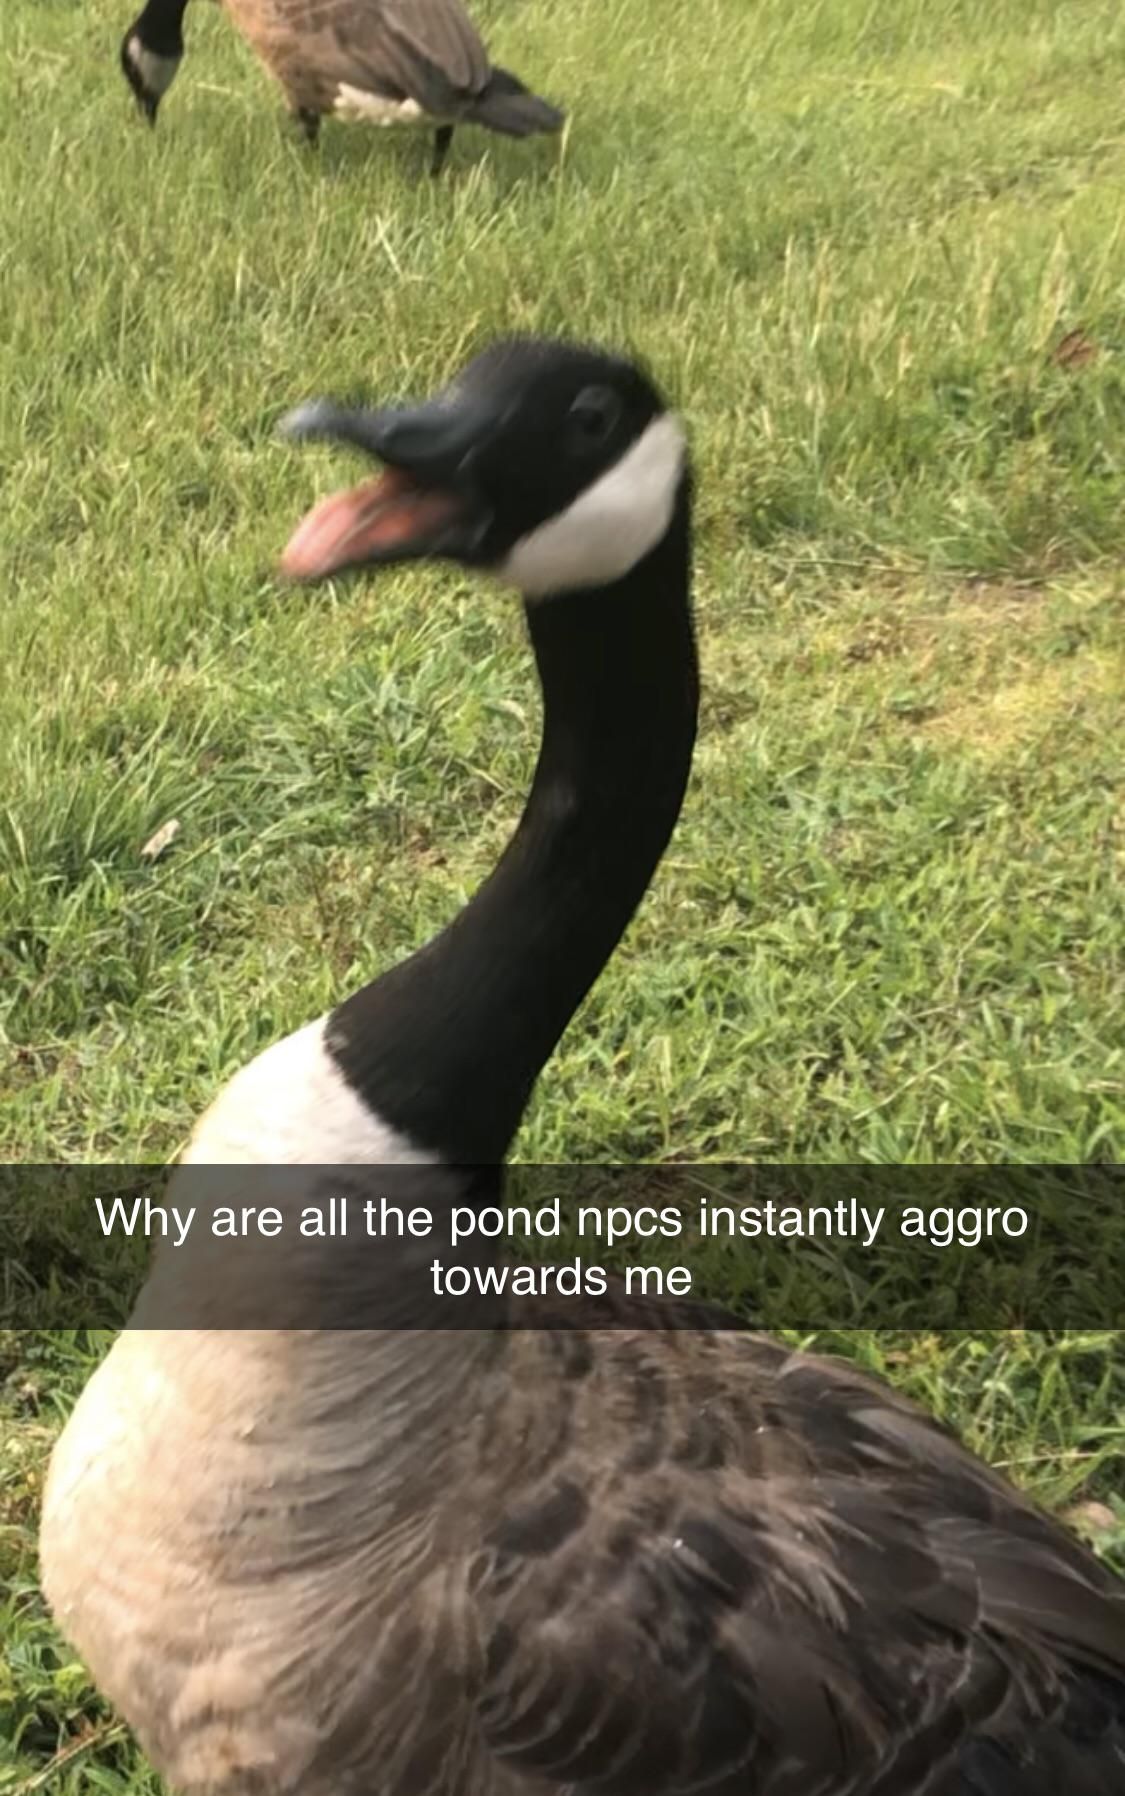 Geese are mean